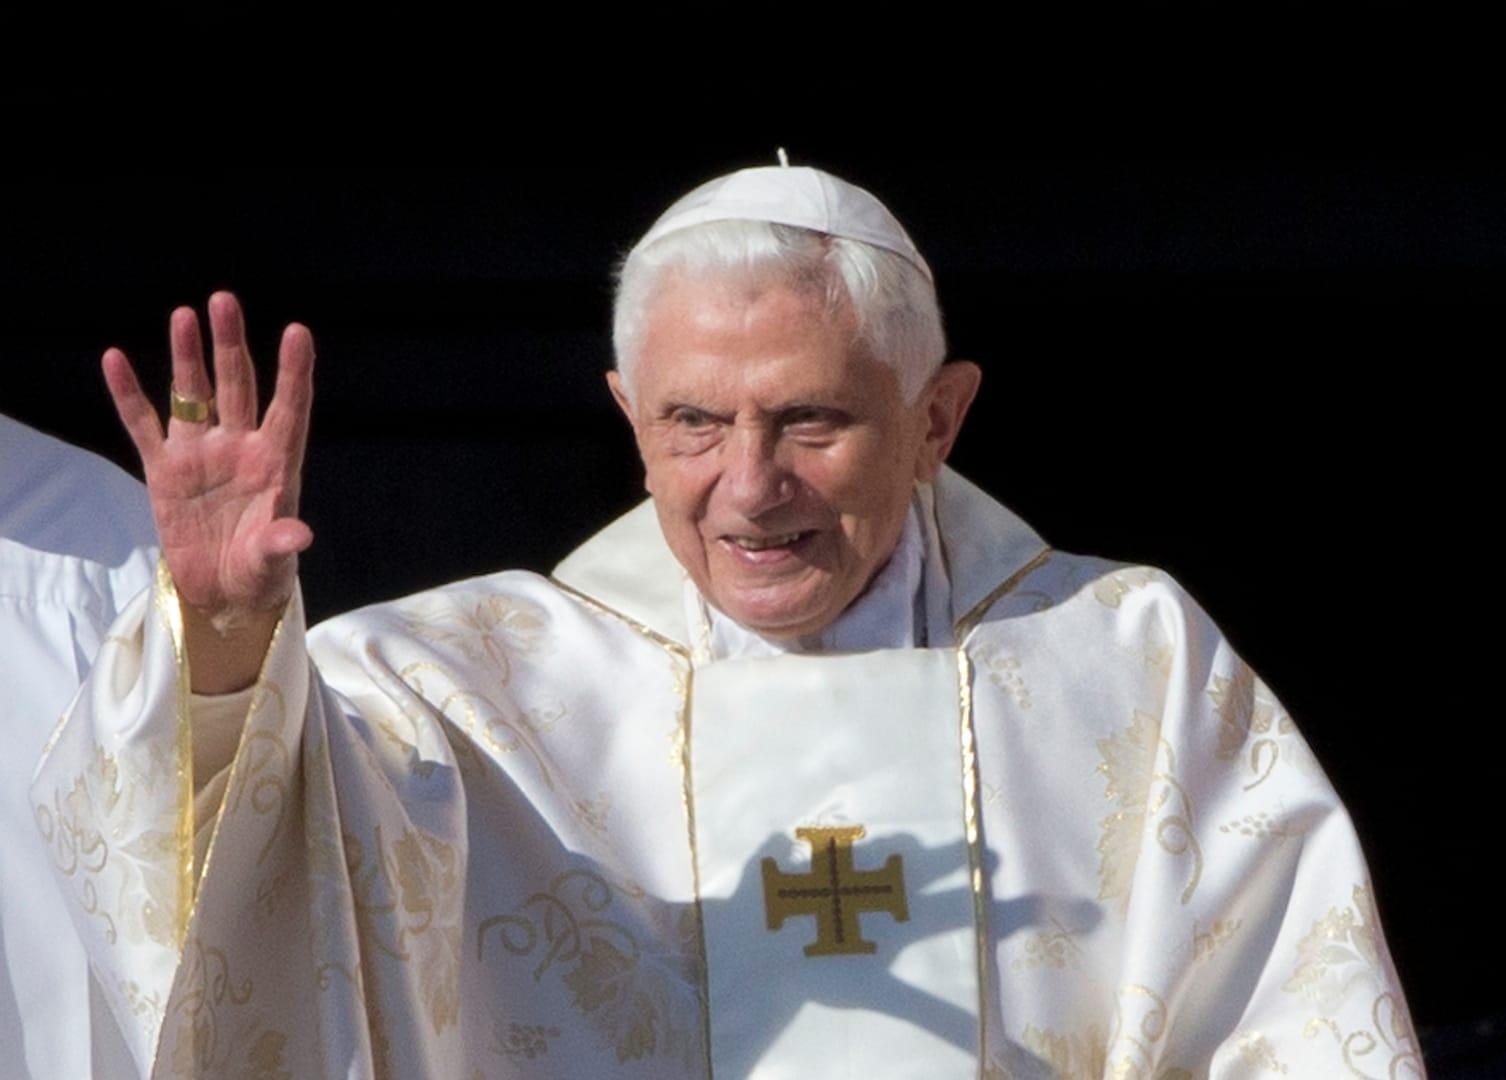 After friend’s death, Benedict XVI says he hopes to join him ‘soon’